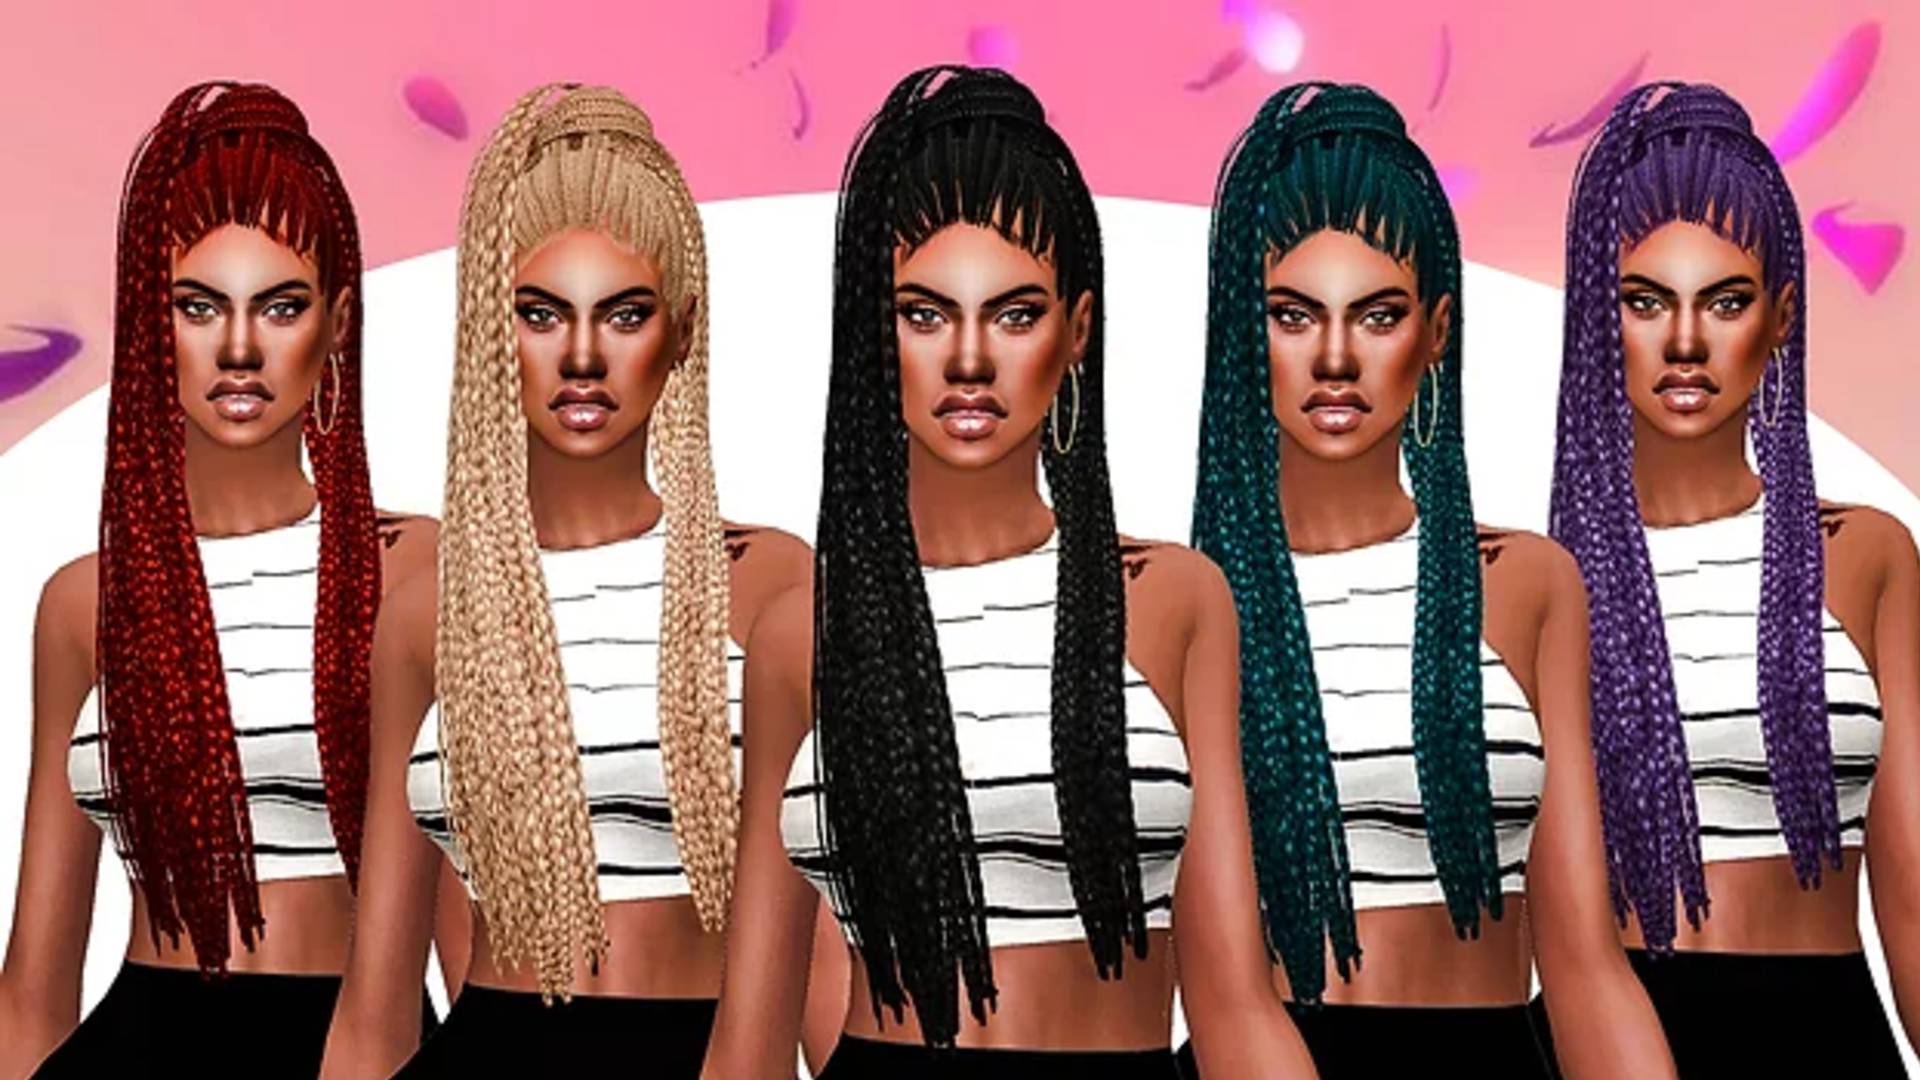 Sims 4 CC: Sims can style their own hair with dreadlocks in a variety of colors, from red to blonde to purple.